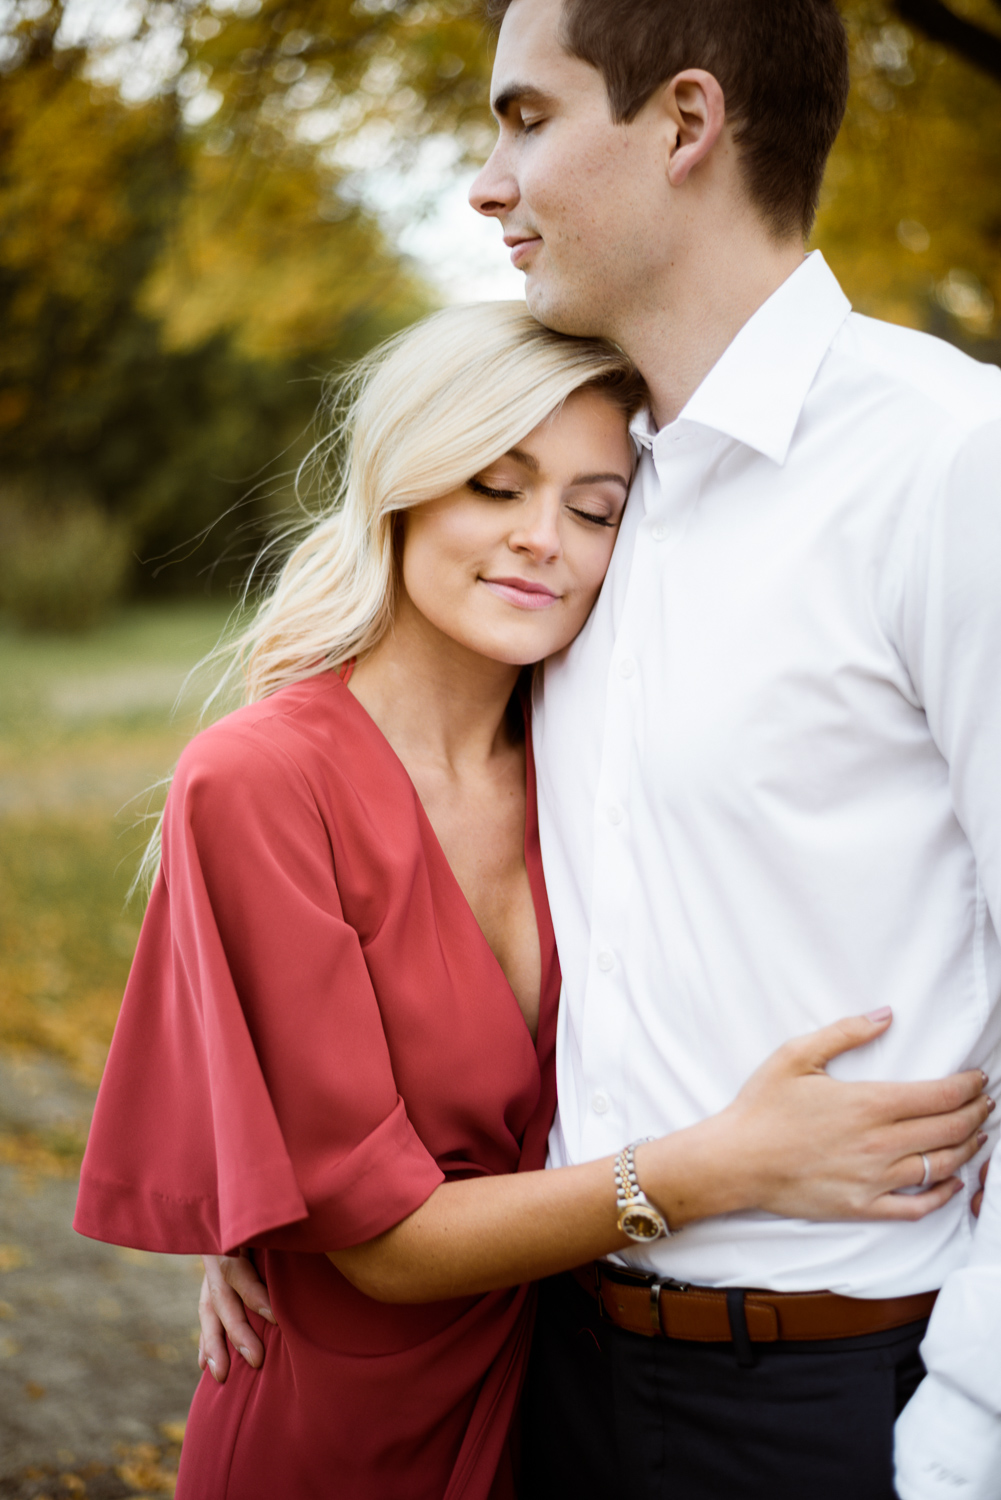 A red dress in the perfect outfit for your engagement session